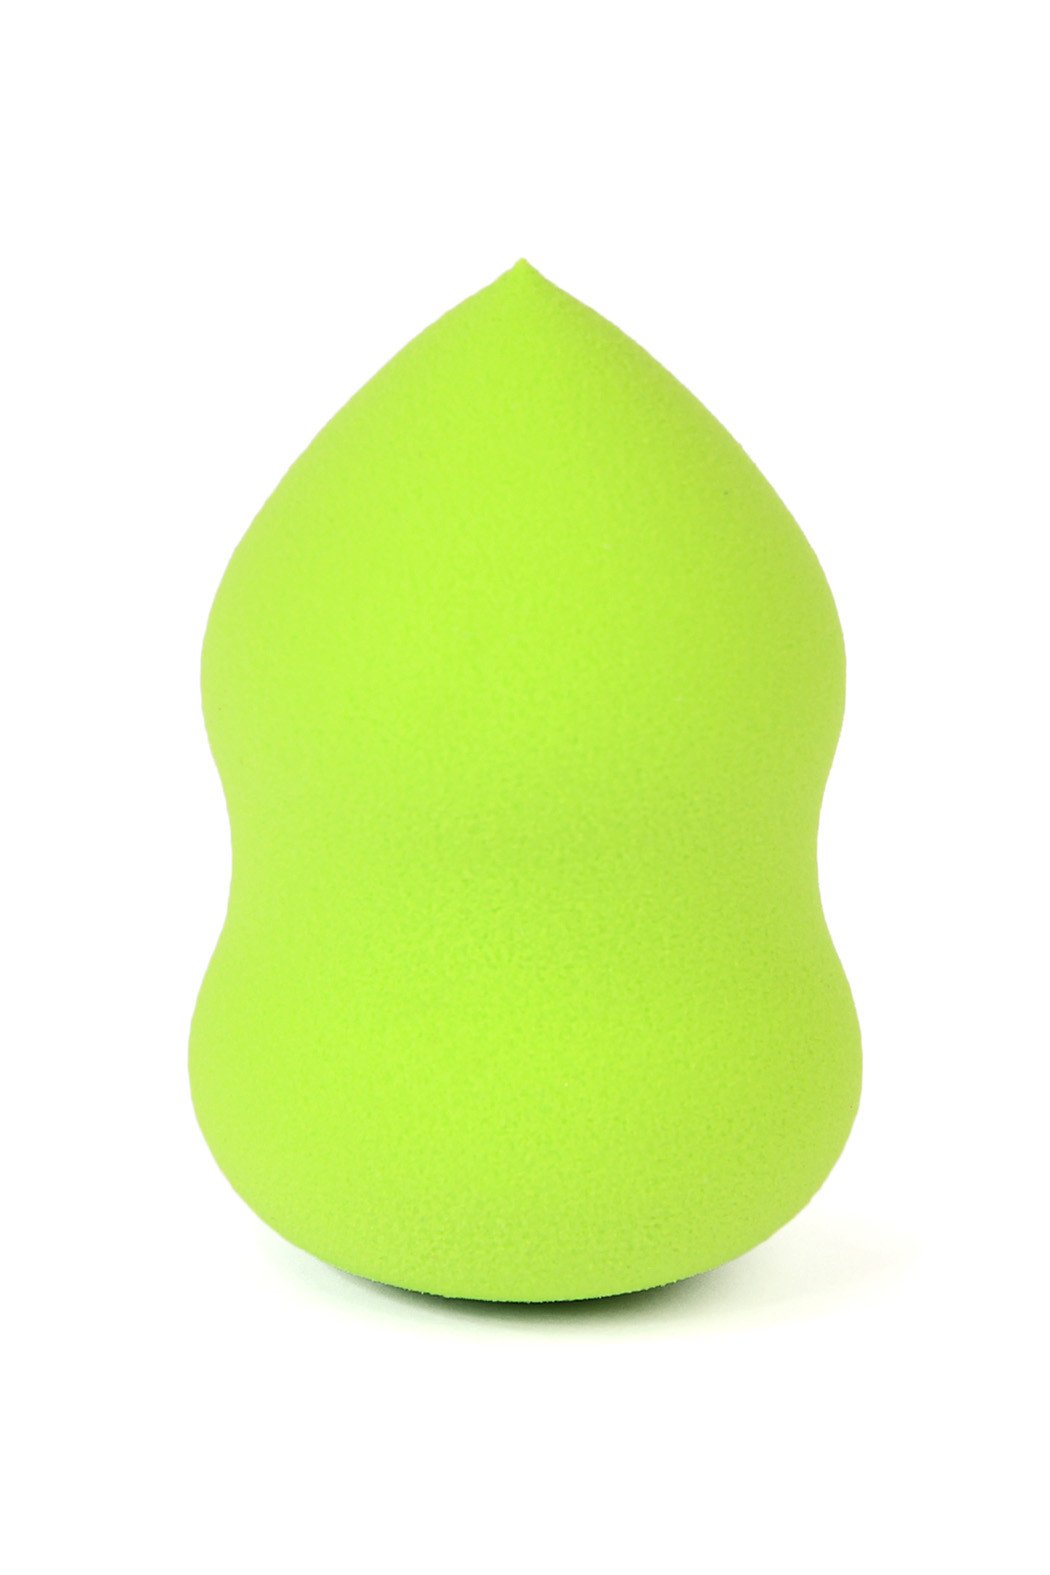 1pc of each 4 color  Double-ended blending sponge for flawless application and blending of liquid cosmetics. Uniquely carved to access broad surfaces as well as hard-to-reach areas.  Latex-free Expands when wet Available in 4 beautifully bold colors. The best price and deal w/ Bonitawholesale.com